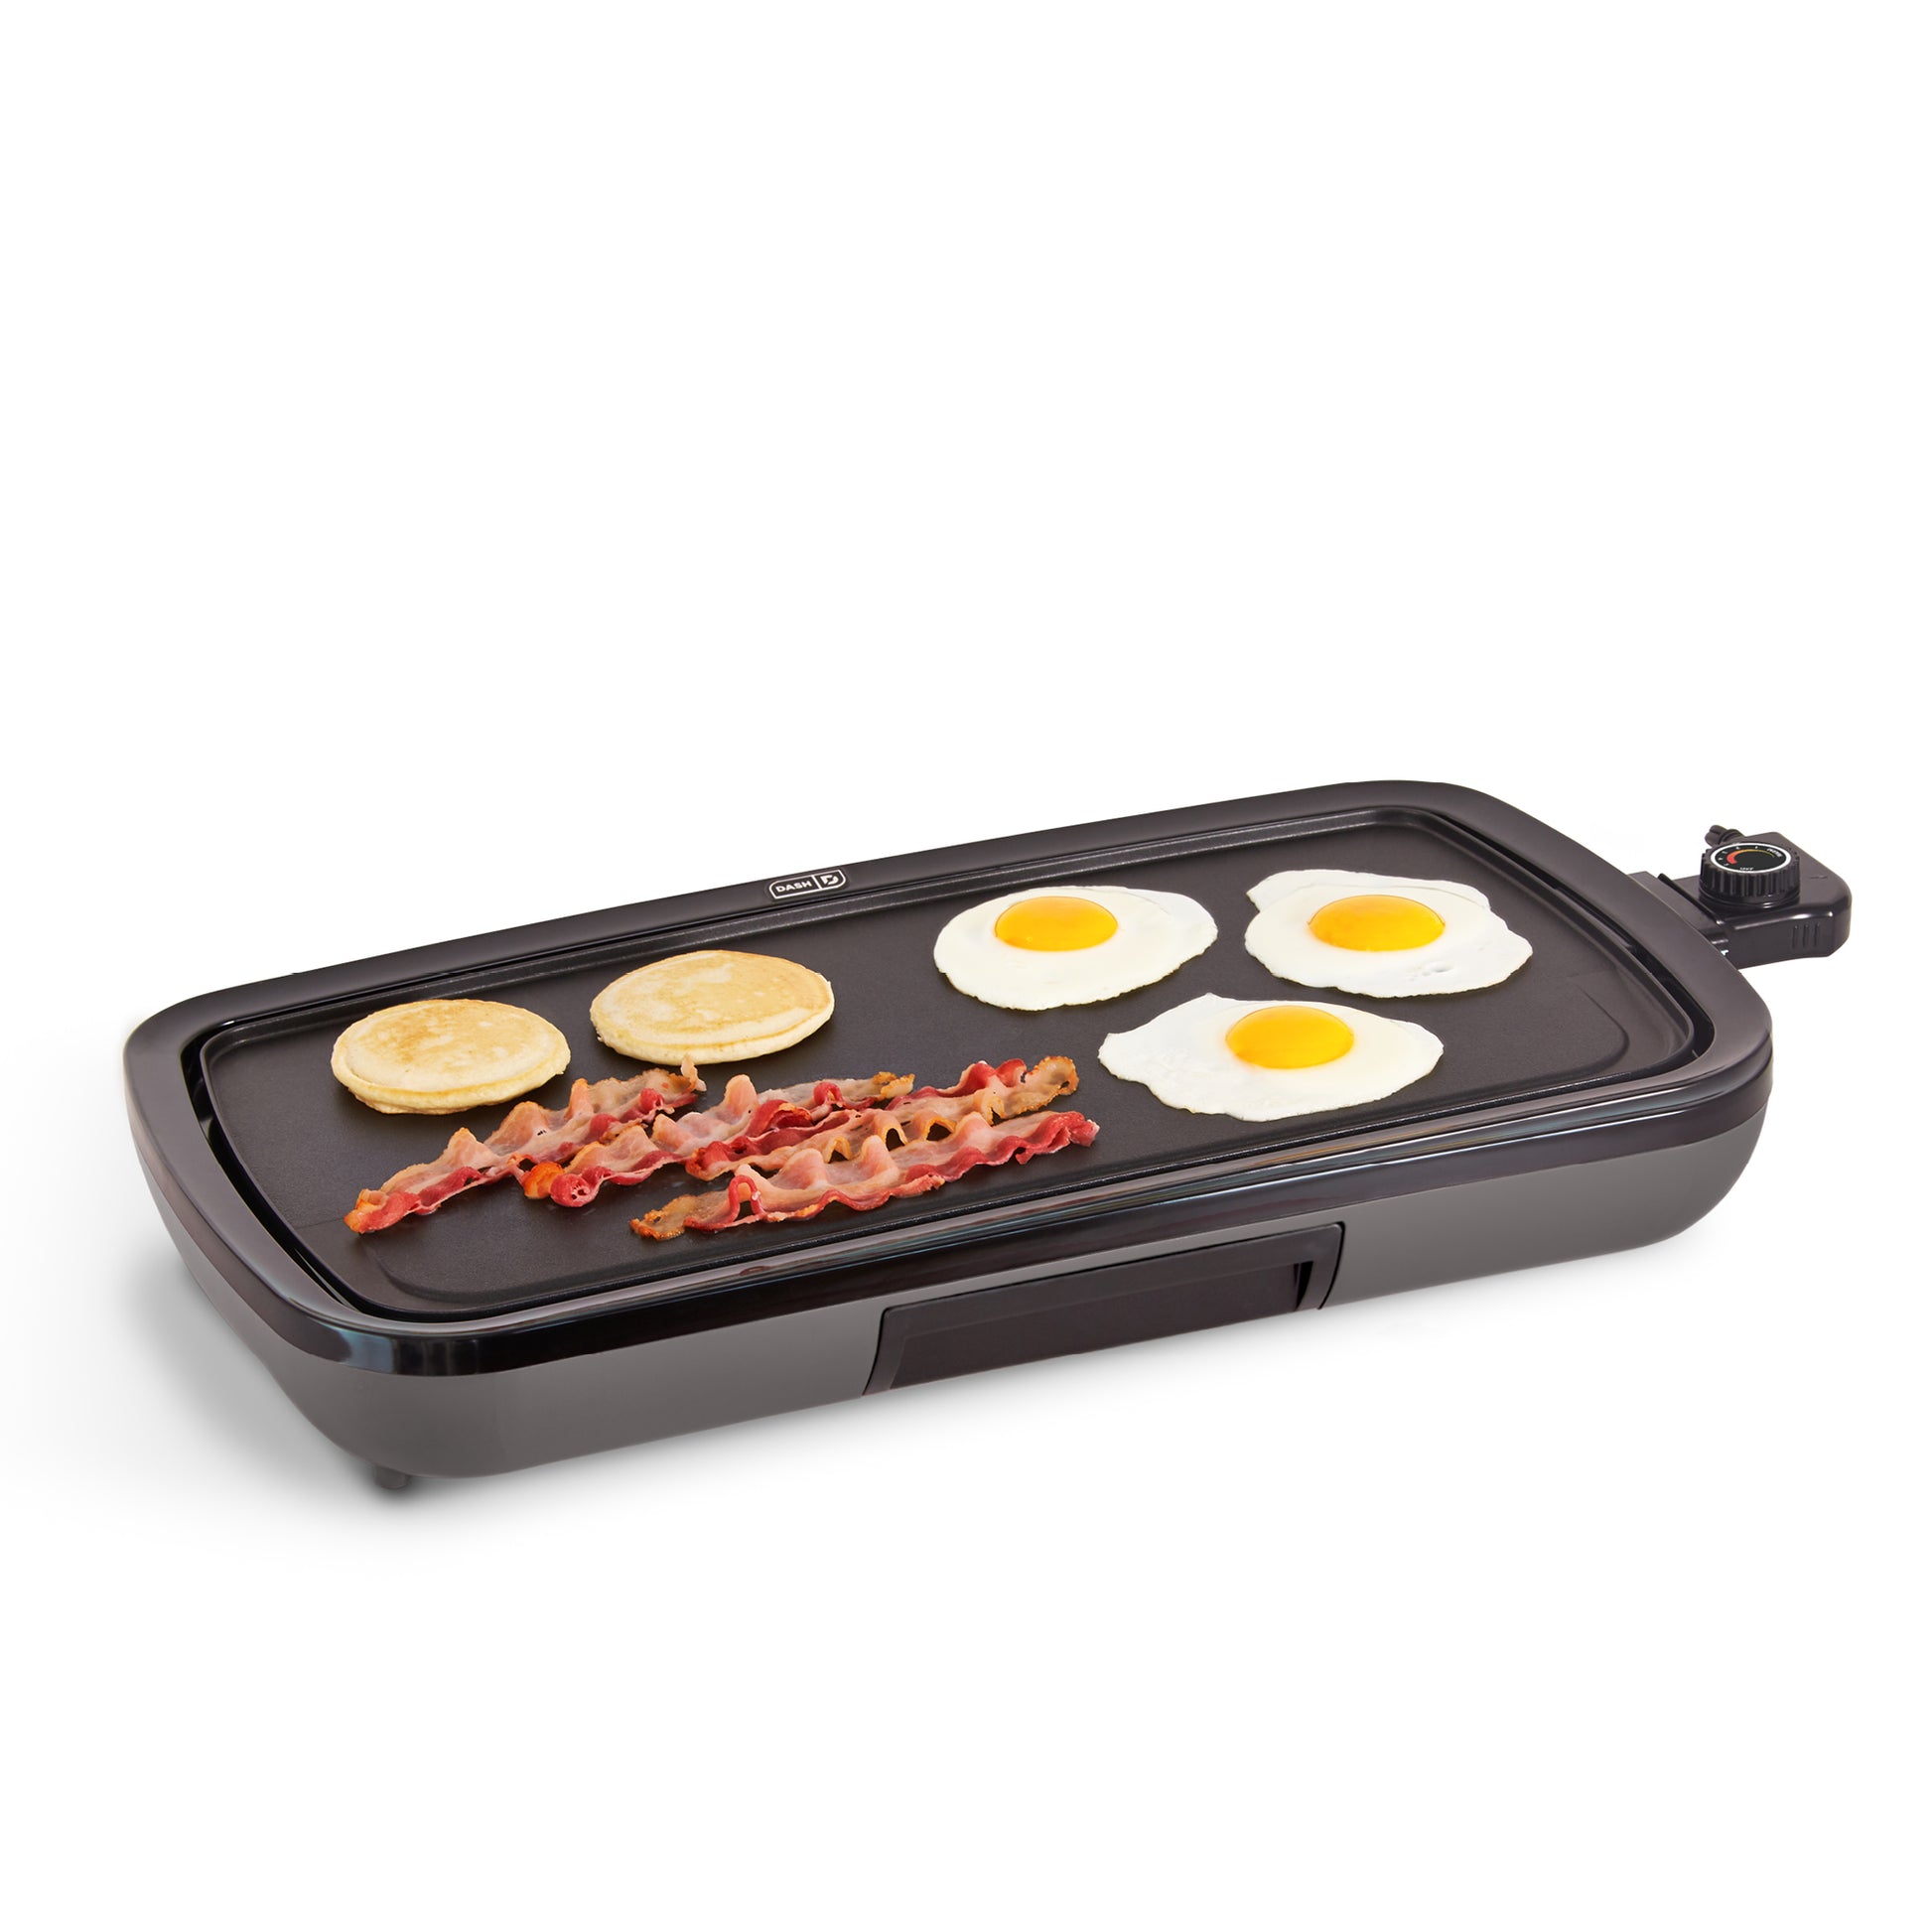 DASH Everyday Nonstick Deluxe Electric Griddle with Removable Cooking Plate  for Pancakes, Burgers, Quesadillas, Eggs and Other Snacks, Includes Drip  Tray + Recipe Book, 20 x 10.5, 1500-Watt, Bla 